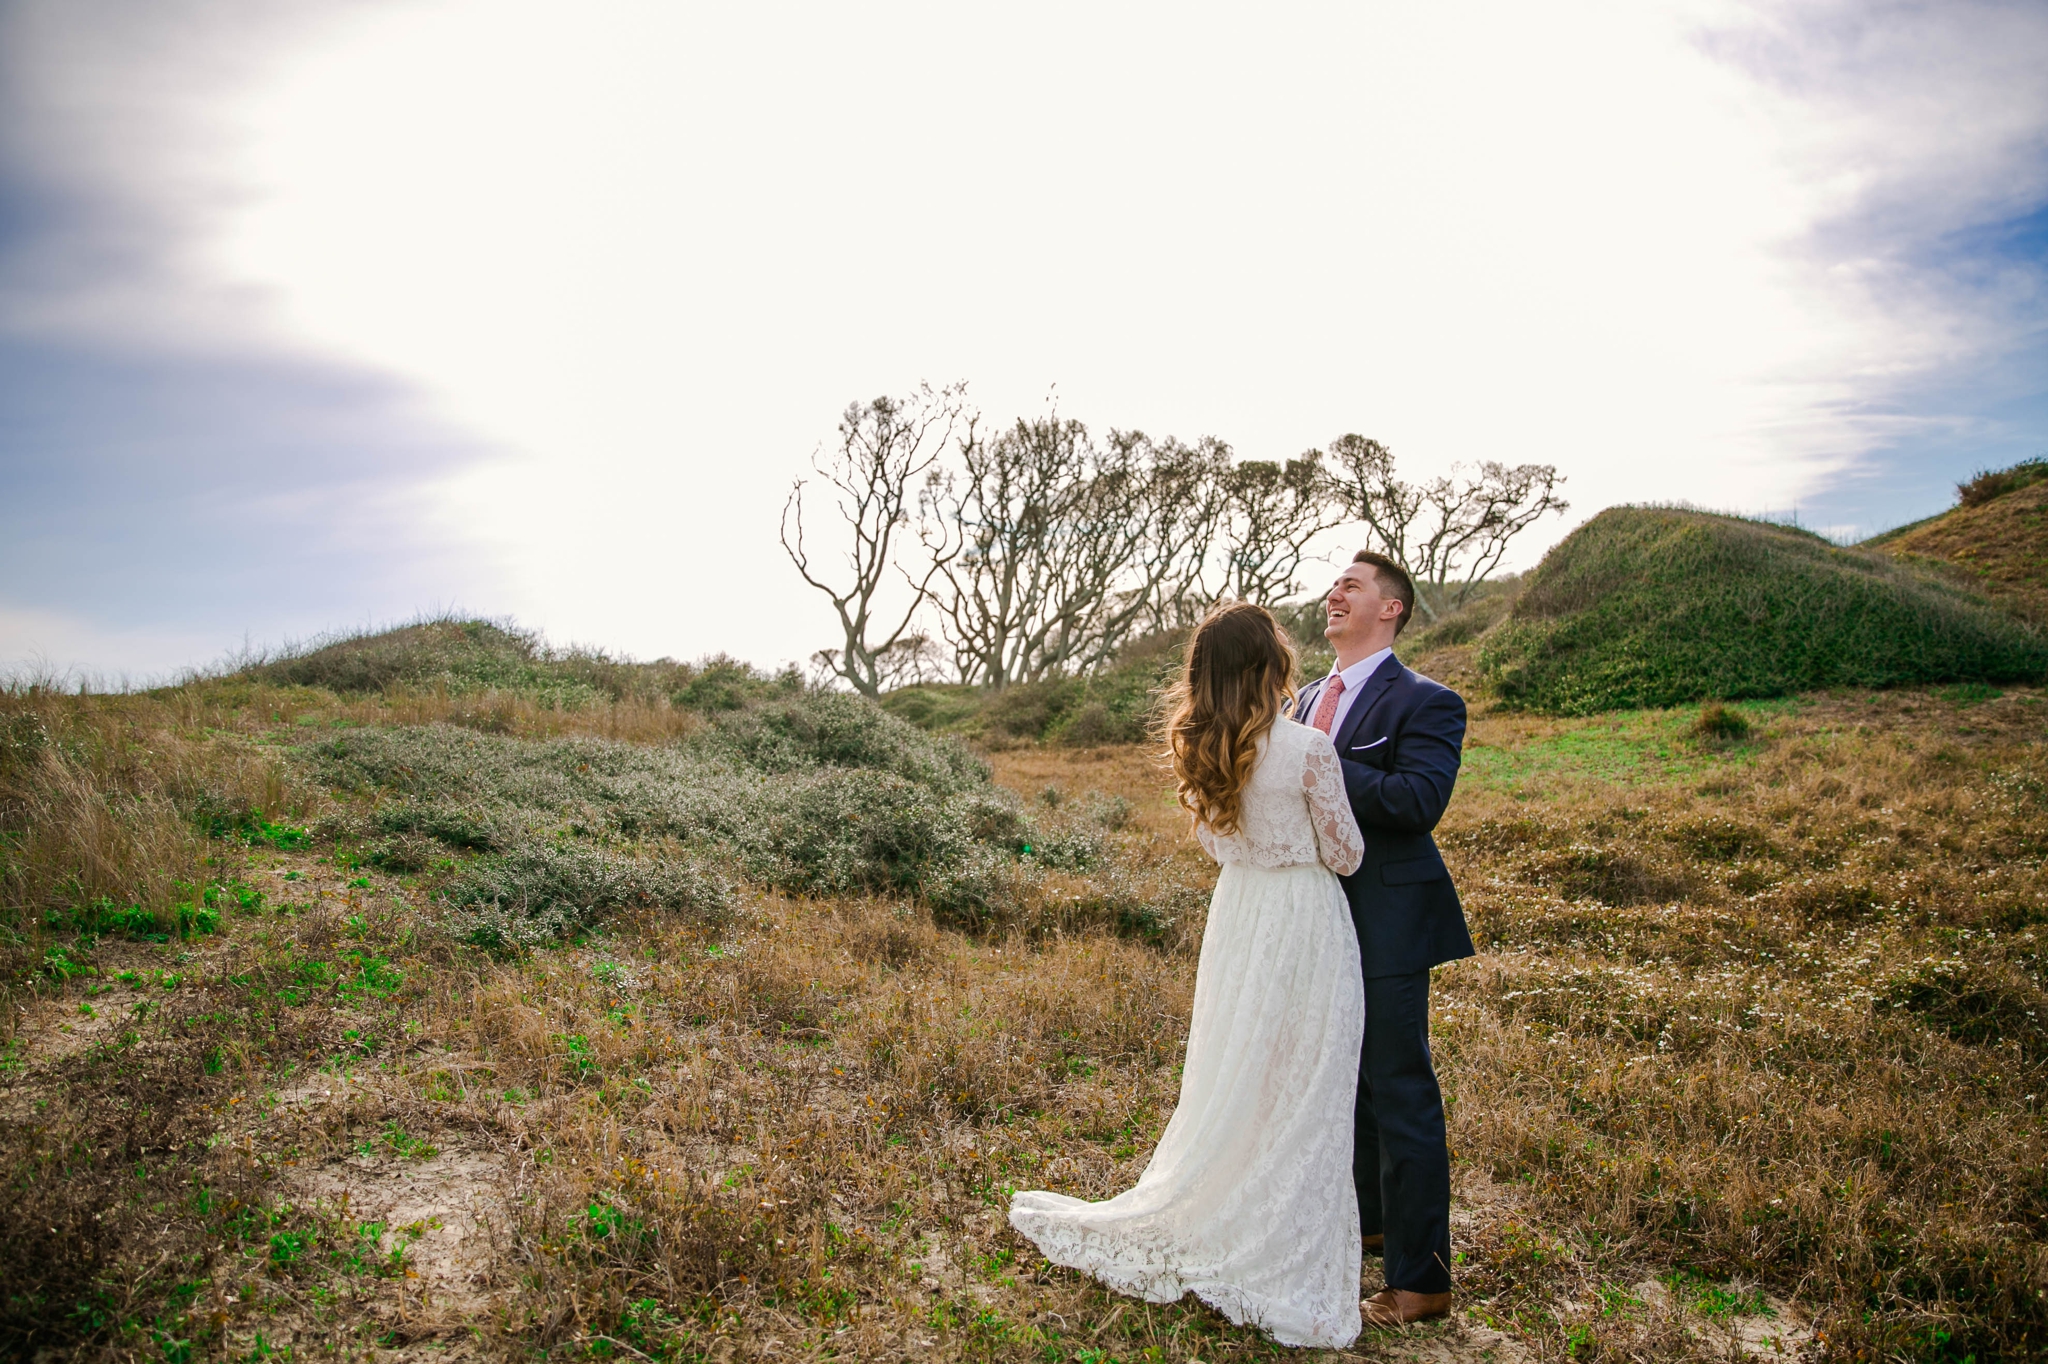 Bride and groom laughing in Lush Green Hills - Beach Elopement Photography - wedding dress by asos with purple and pink flowers and navy suit - oahu hawaii wedding photographer